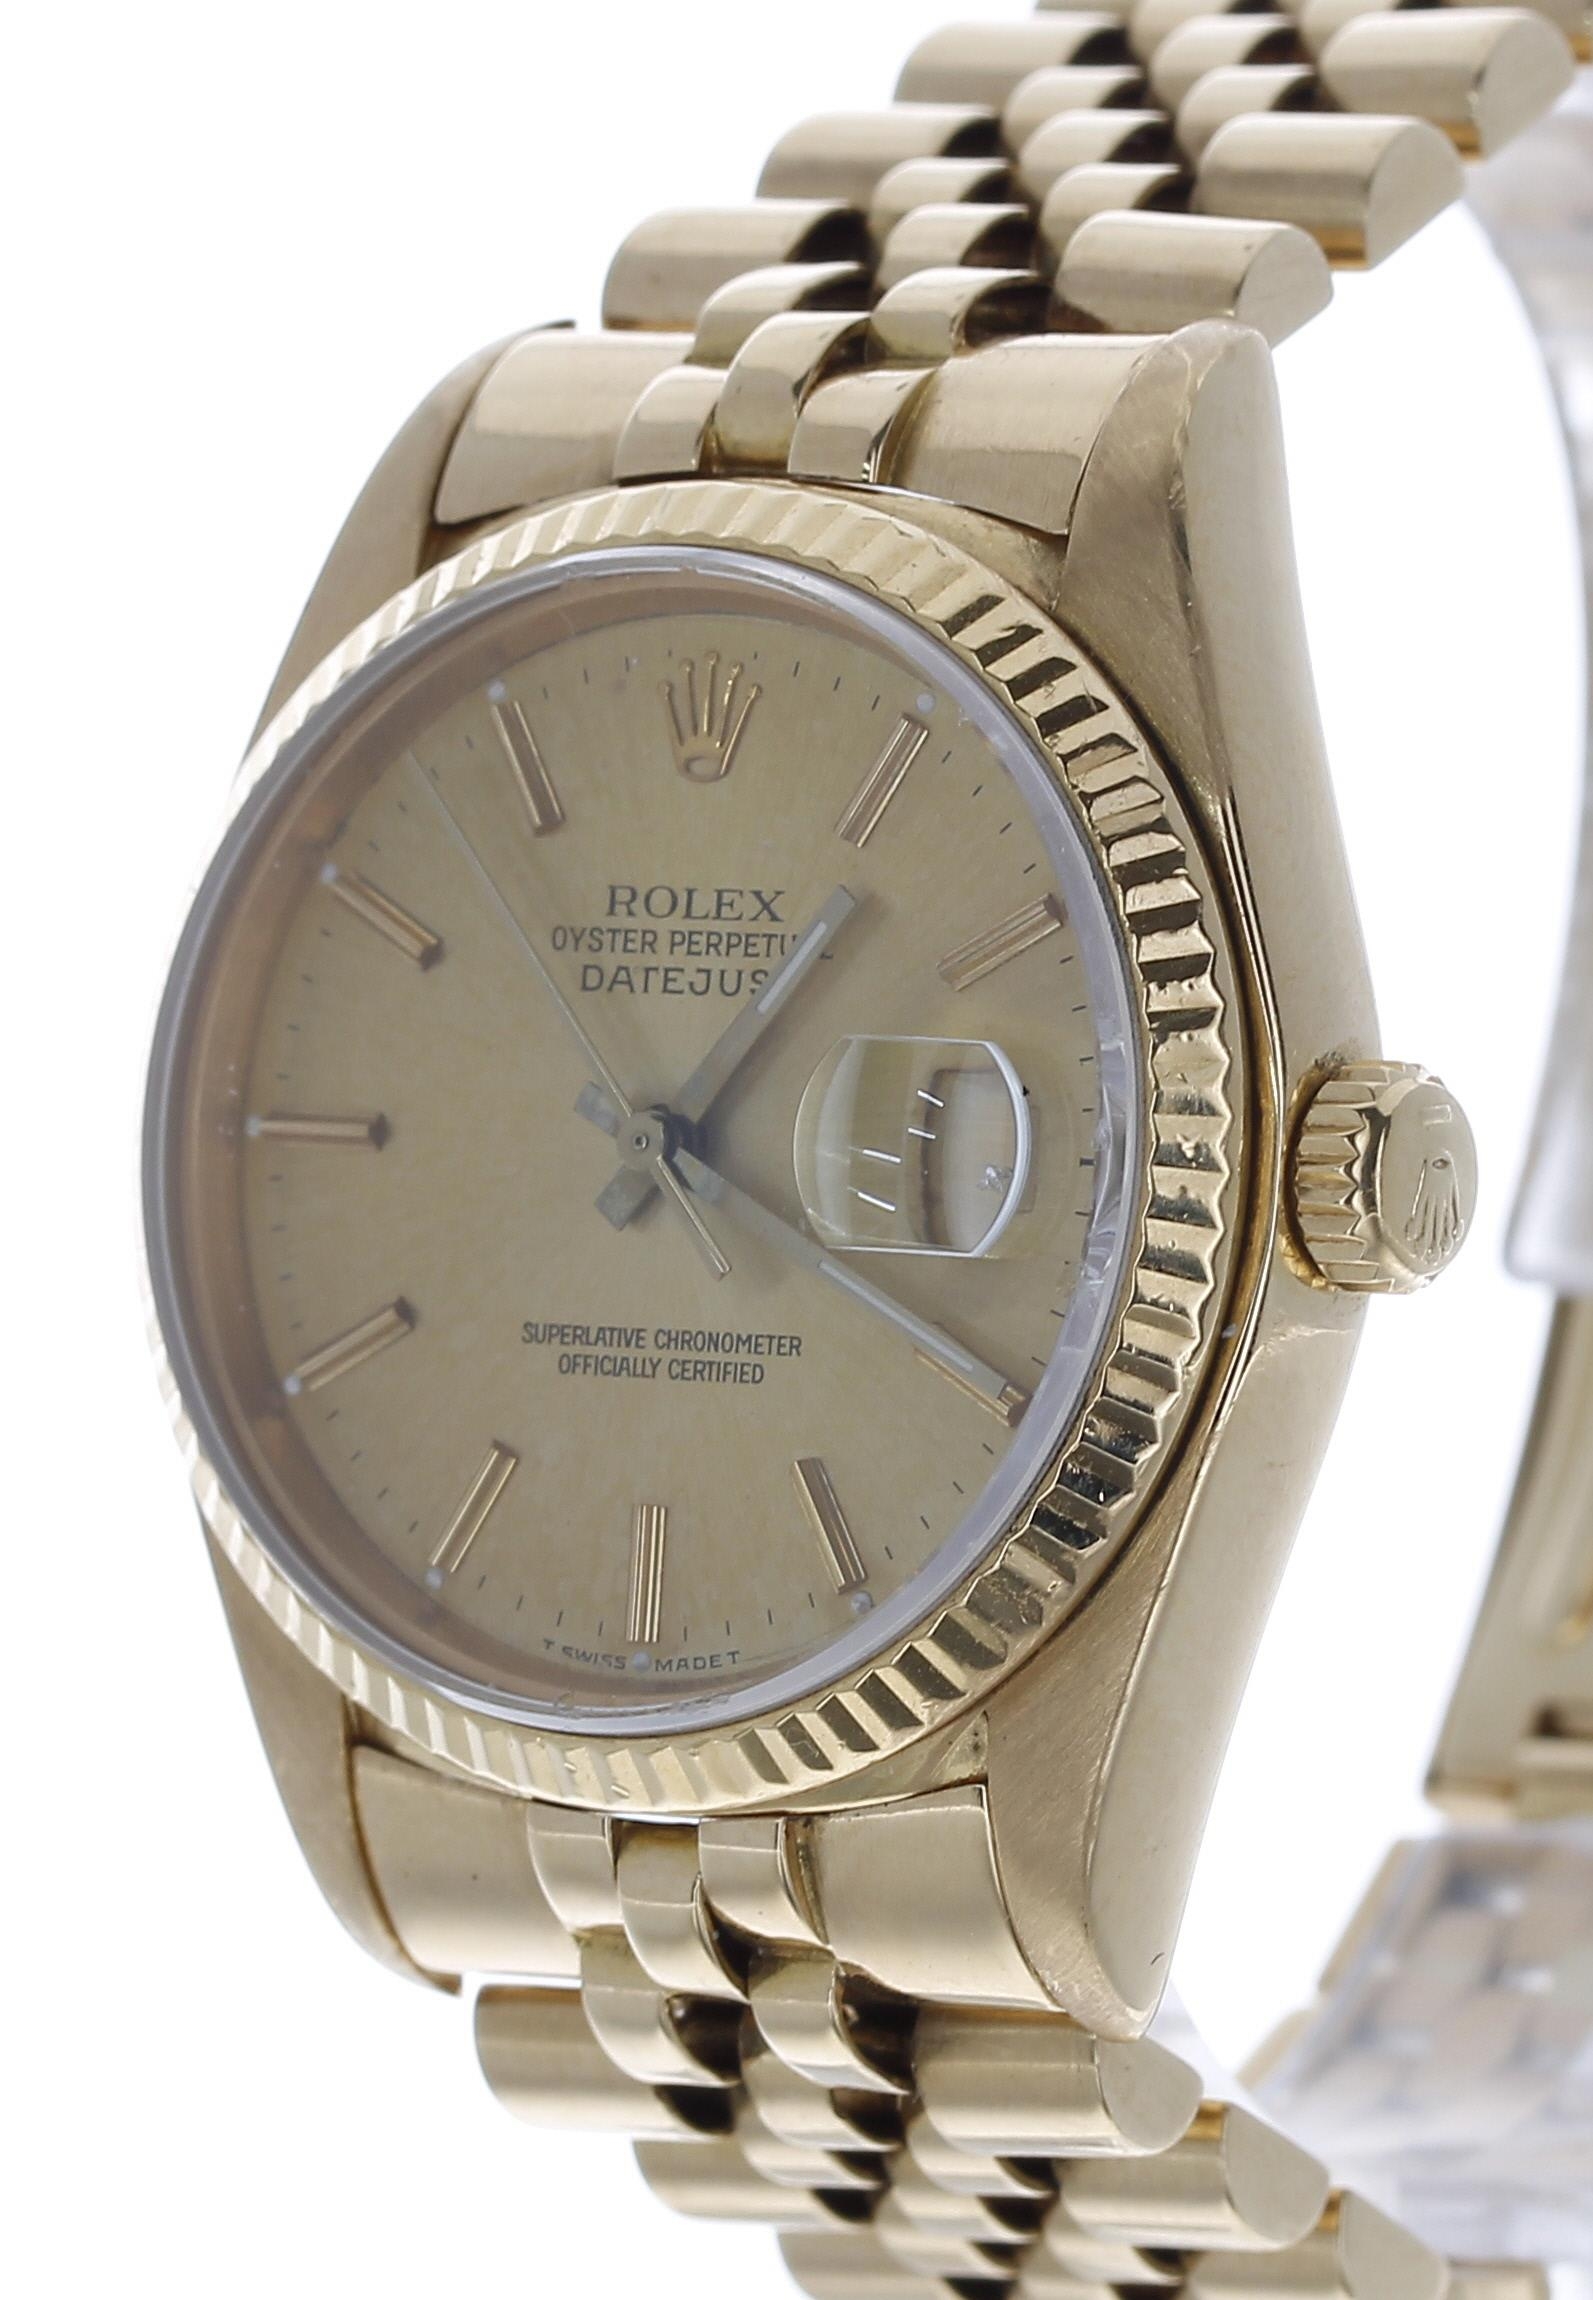 Rolex Oyster Perpetual Datejust 18ct gentleman's wristwatch, reference no. 16018, serial no. - Image 2 of 5